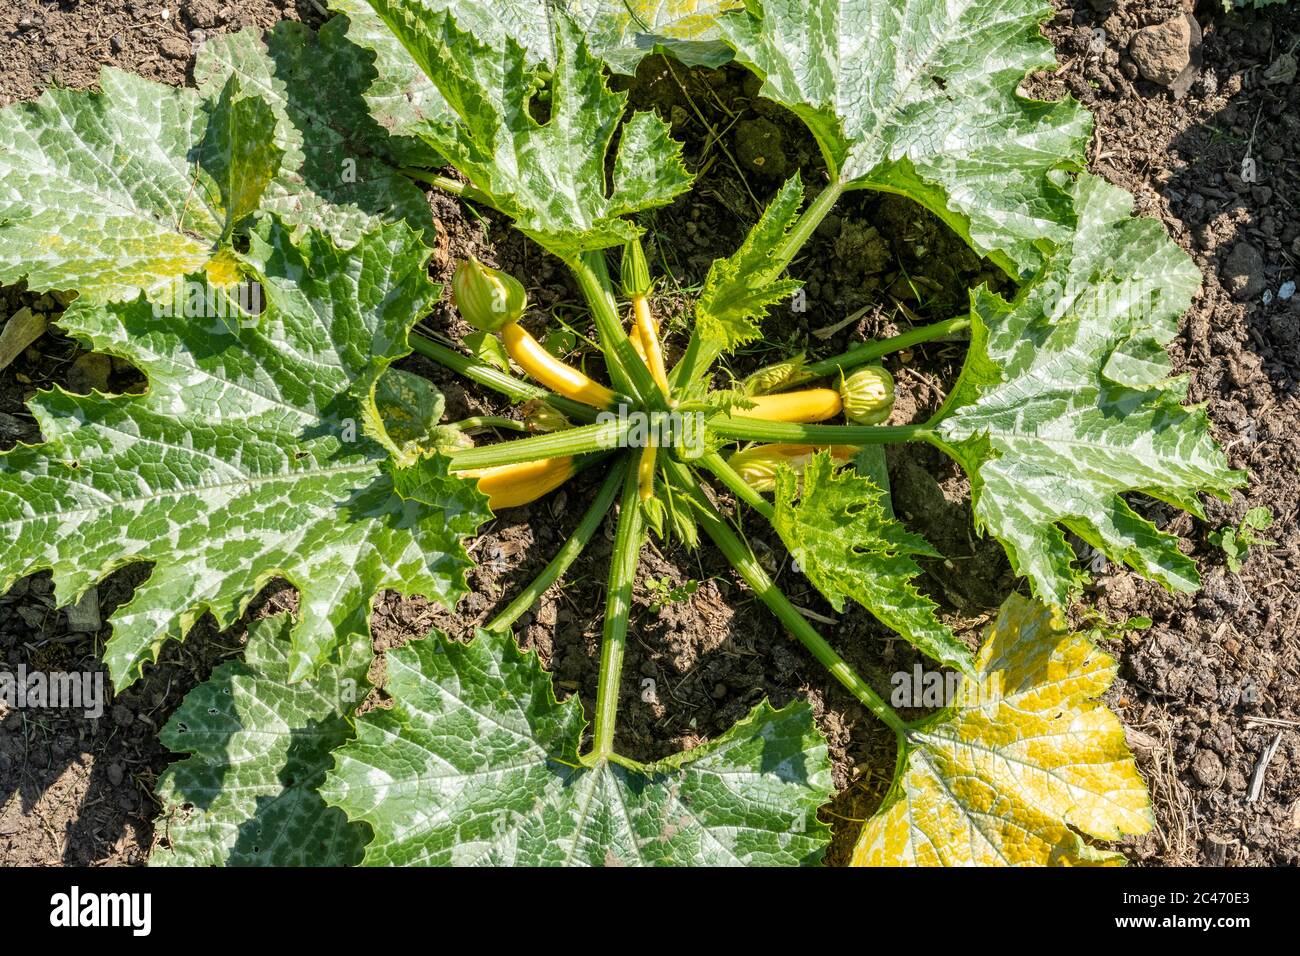 Courgette 'Golden Zucchini' plants growing in a vegetable garden during June, UK Stock Photo